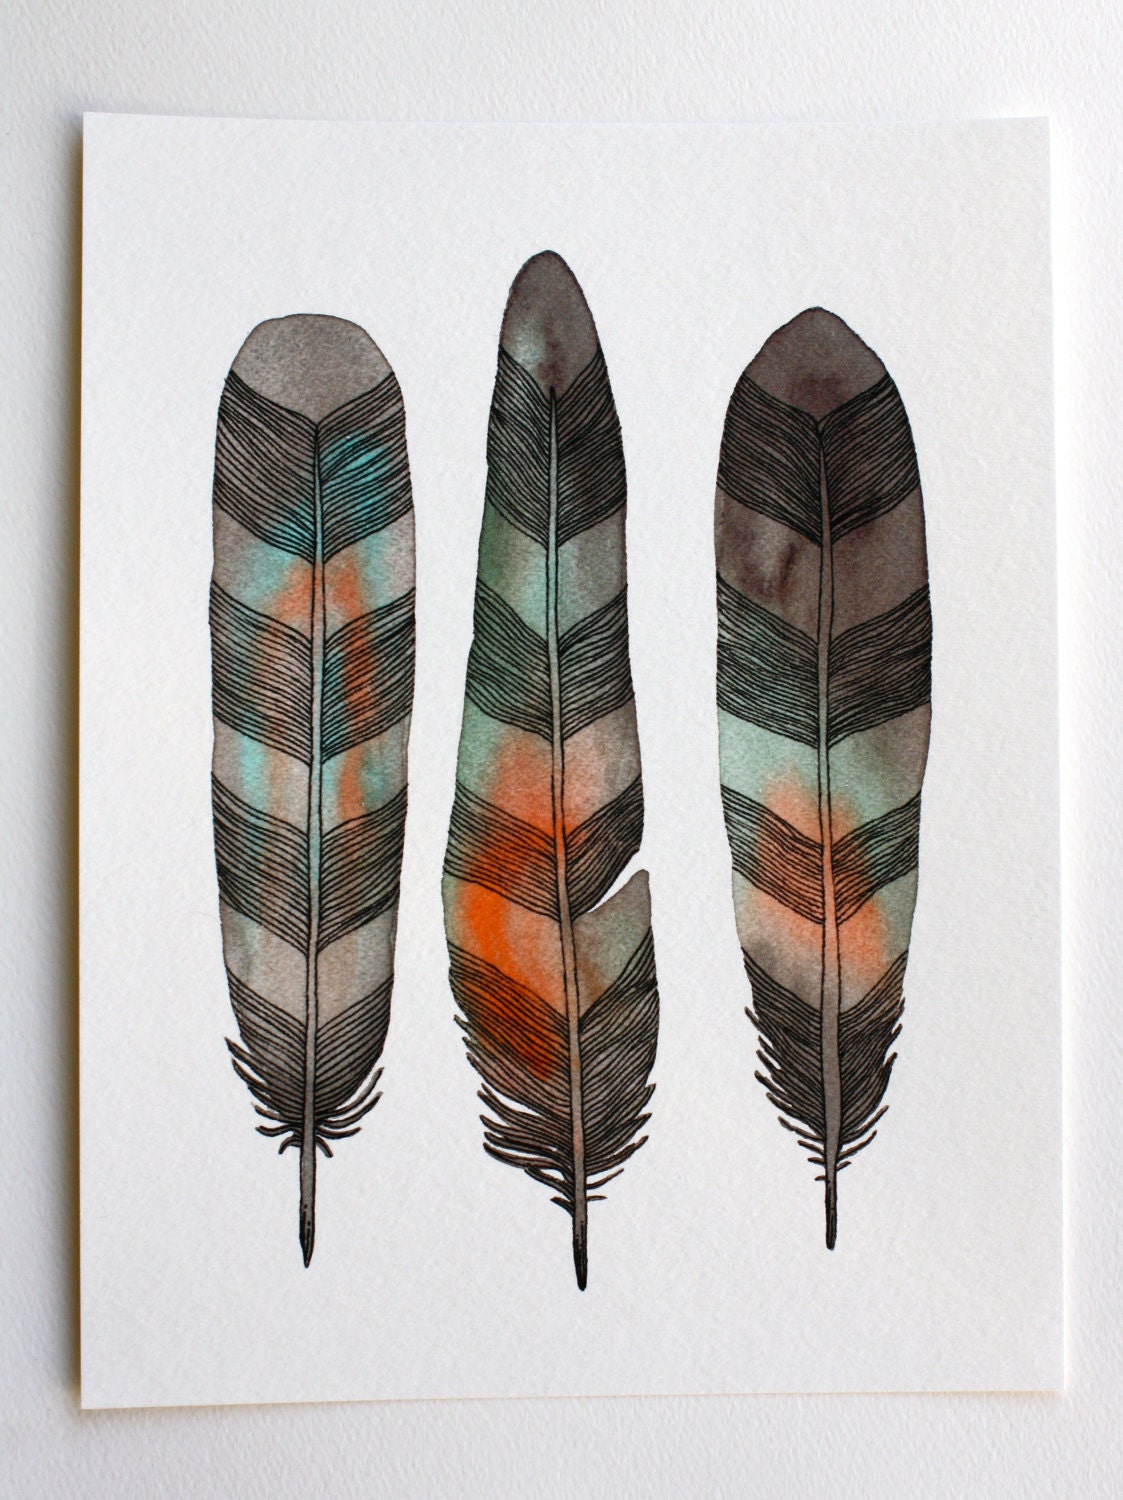 Watercolor Feather Painting - Modern Art - Archival Print - 8x10 Chevron Feathers